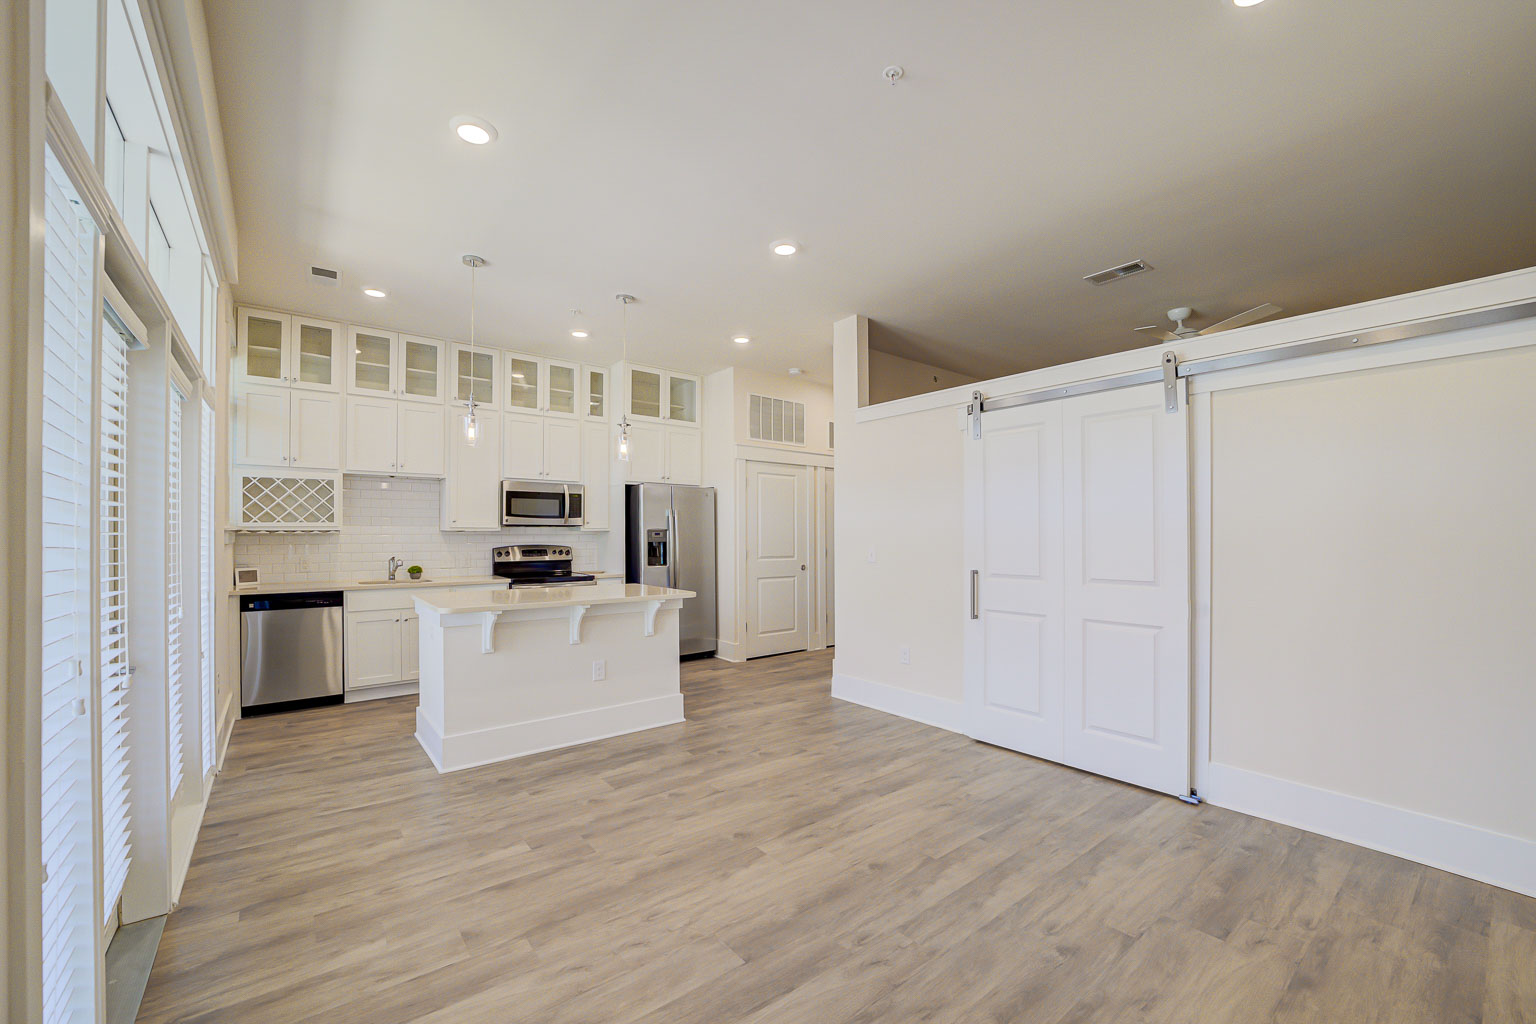 Studio kitchen and living area at Holly Crest Apartments